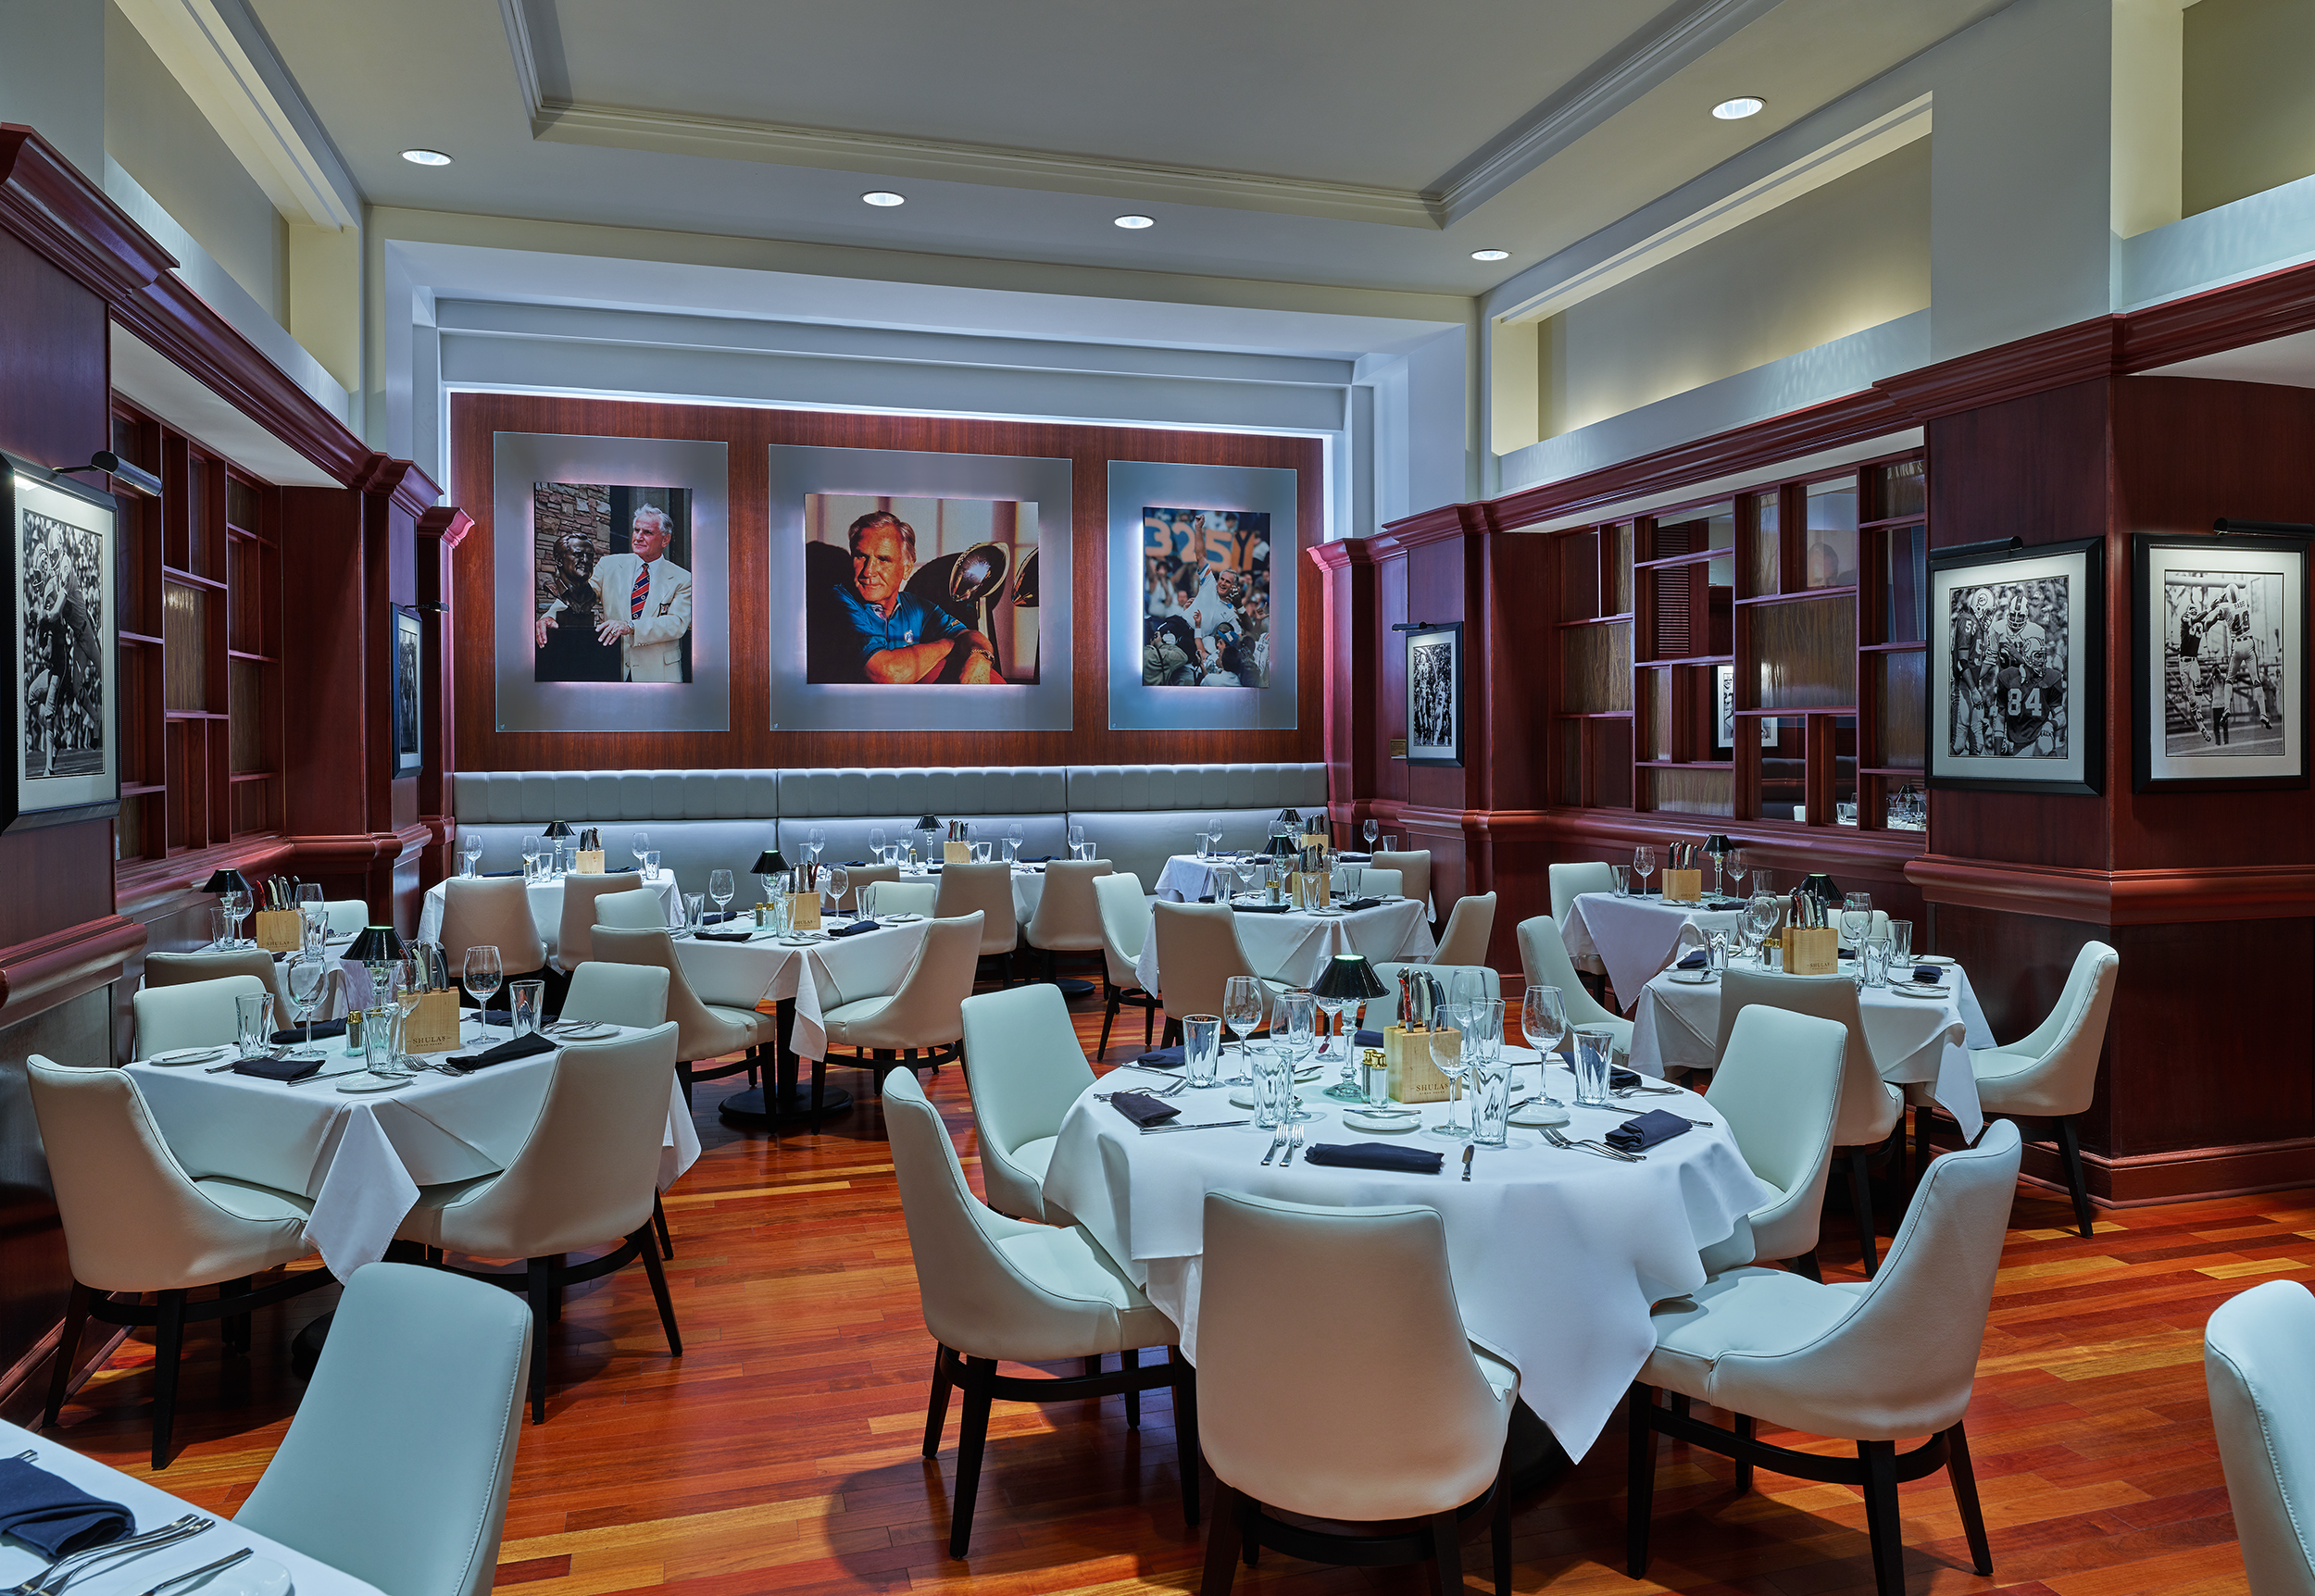 Shula's Steak House Dining Room with Set Tables, Chairs and Memorabilia